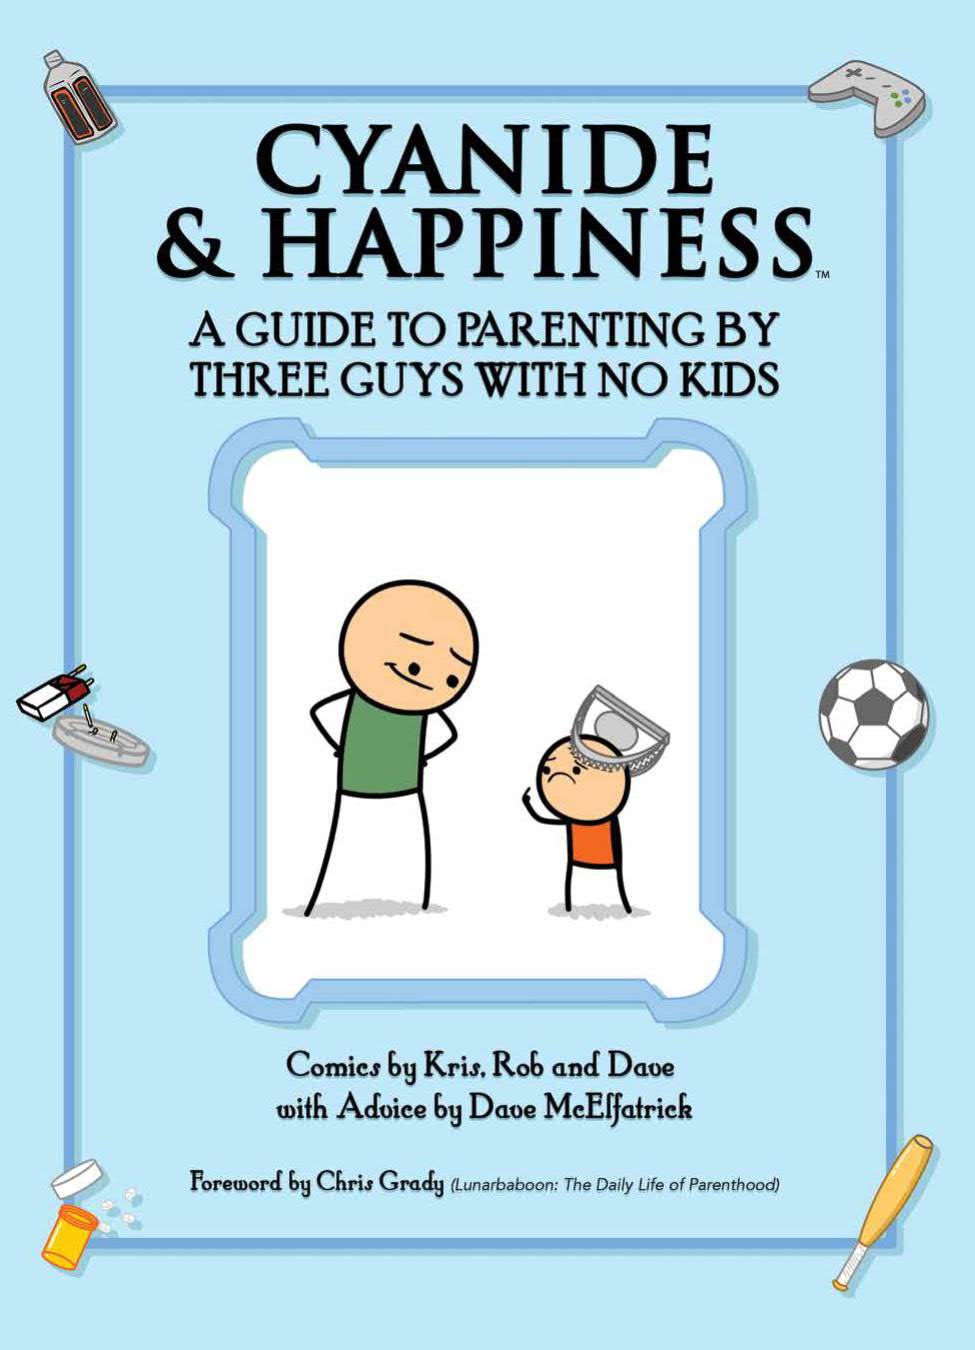 Cyanide & Happiness Graphic Novel Guide Parenting by 3 Guys With No Kids